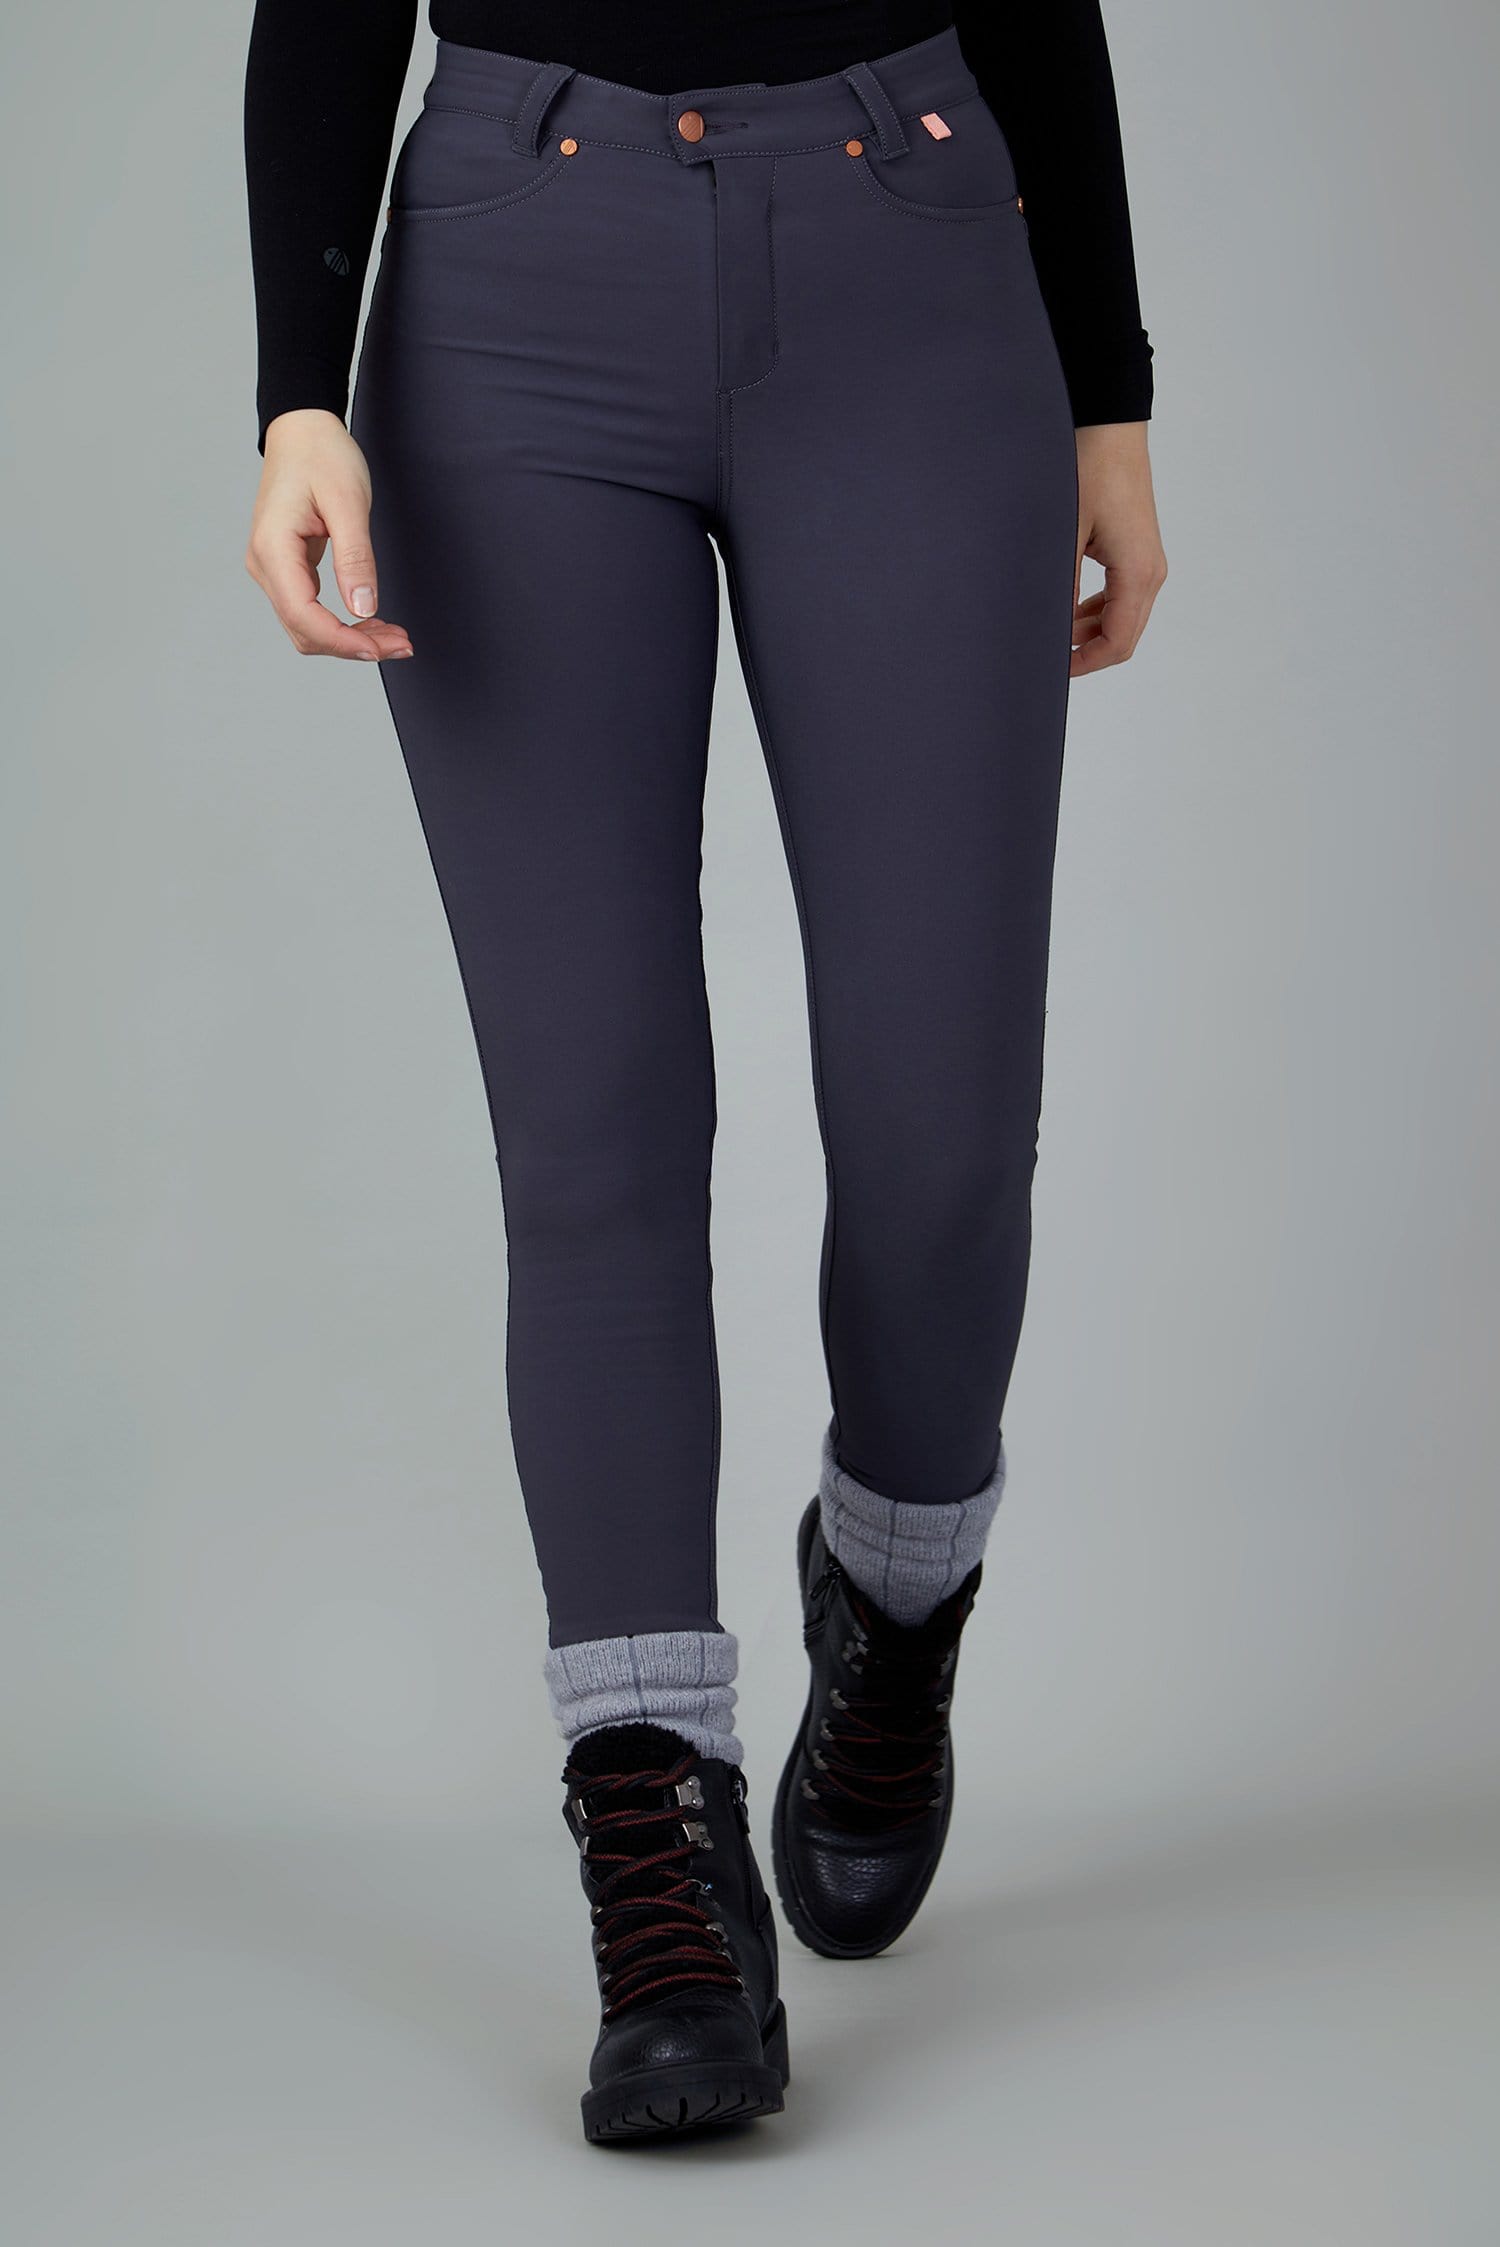 Women's Stretchy FUNDY Pants - Outdoor Pants